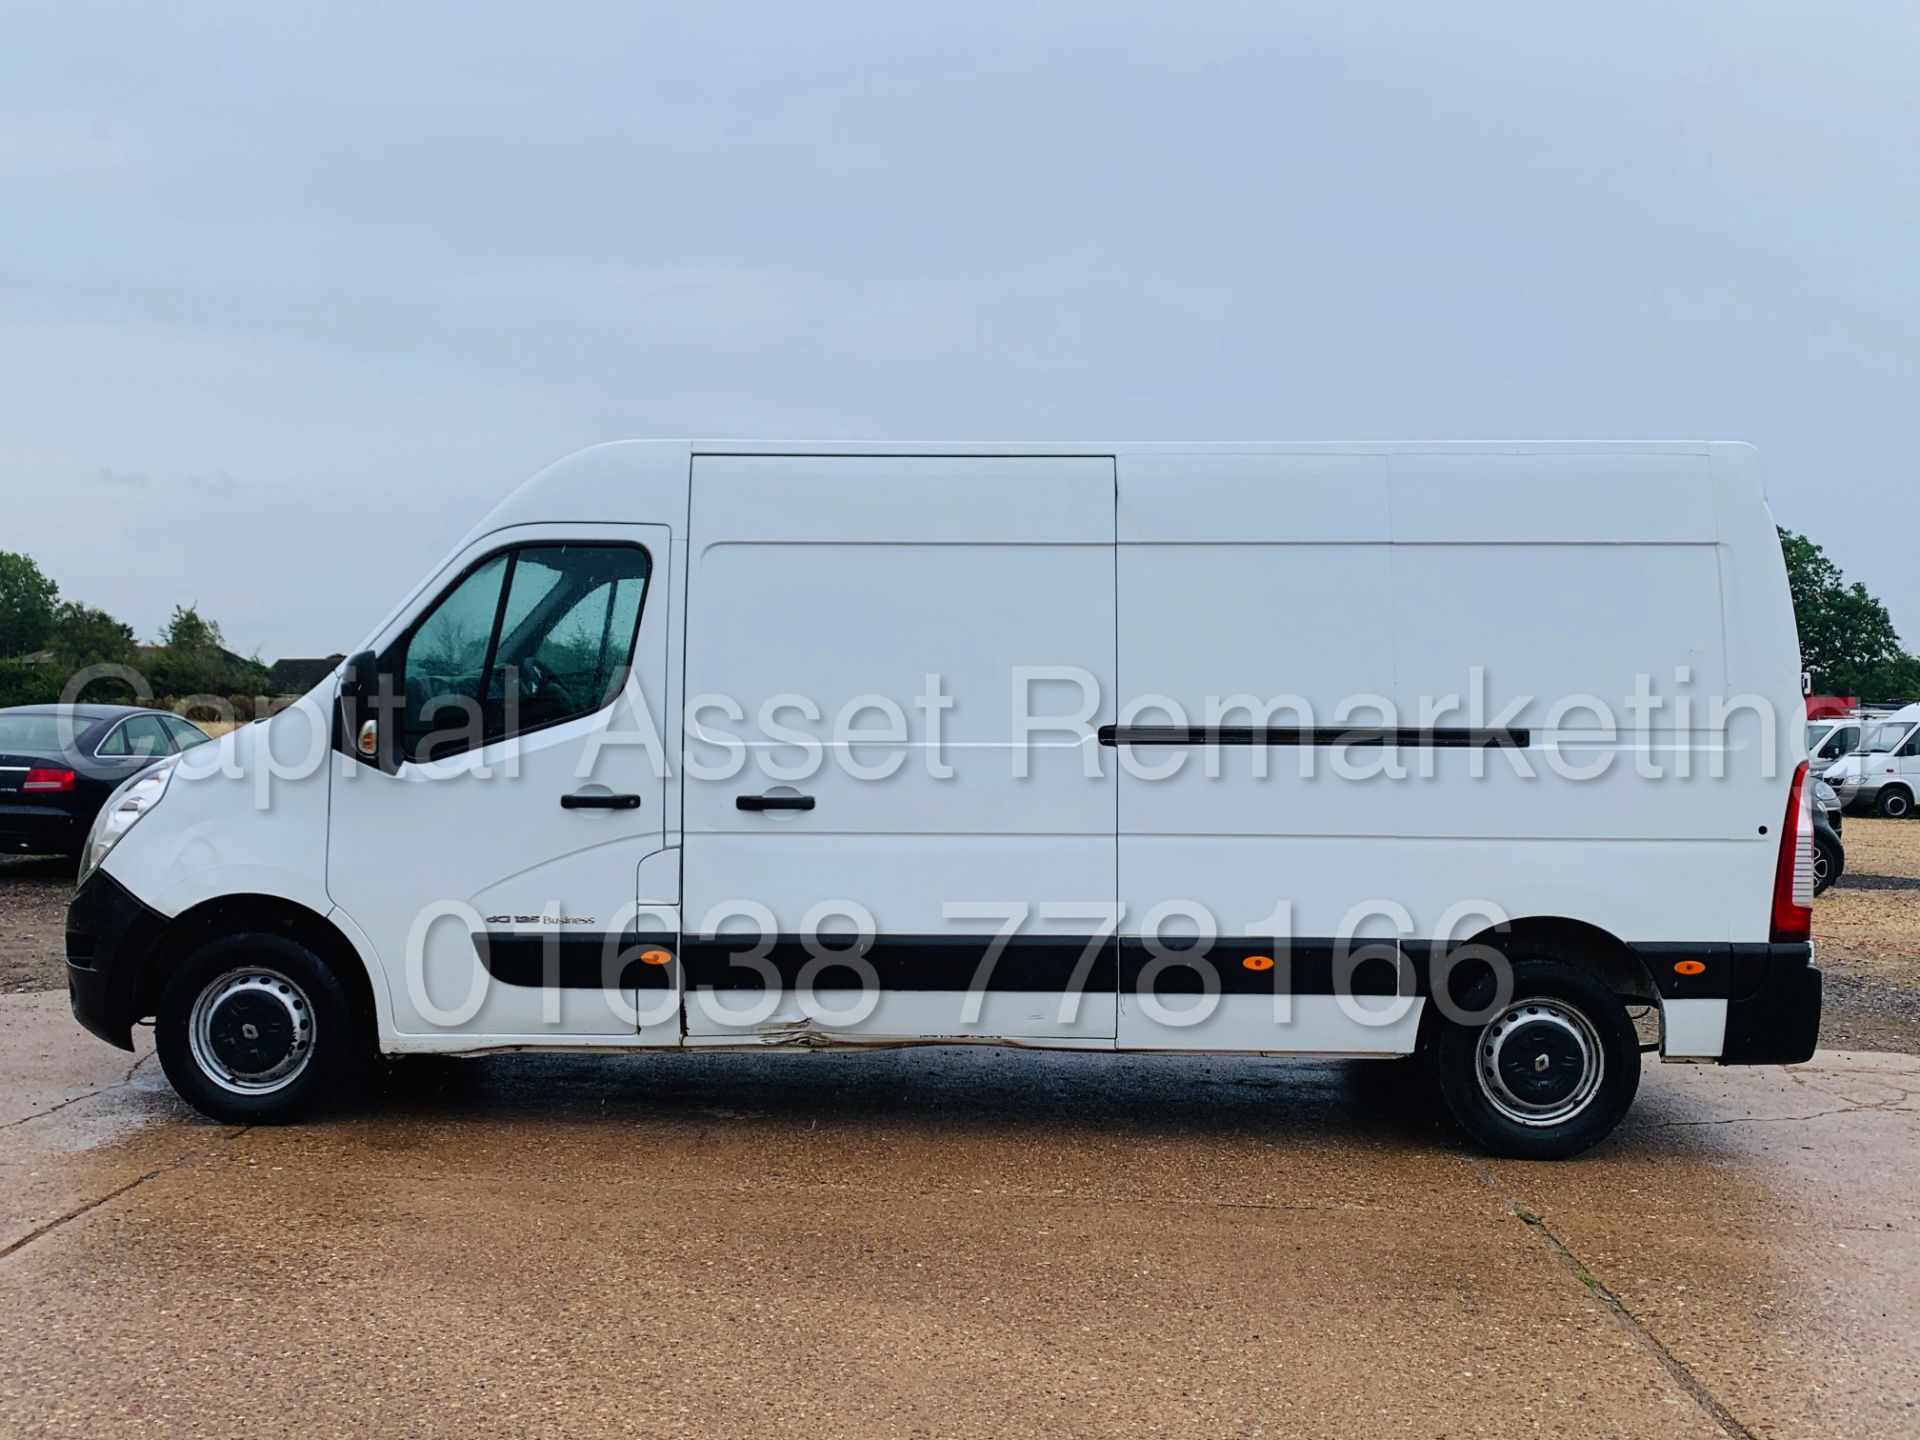 (On Sale) VAUXHALL MOVANO F3500 *LWB HI-ROOF* (2014) '2.3 DCTI - 125 BHP - 6 SPEED' (3500 KG) - Image 2 of 27